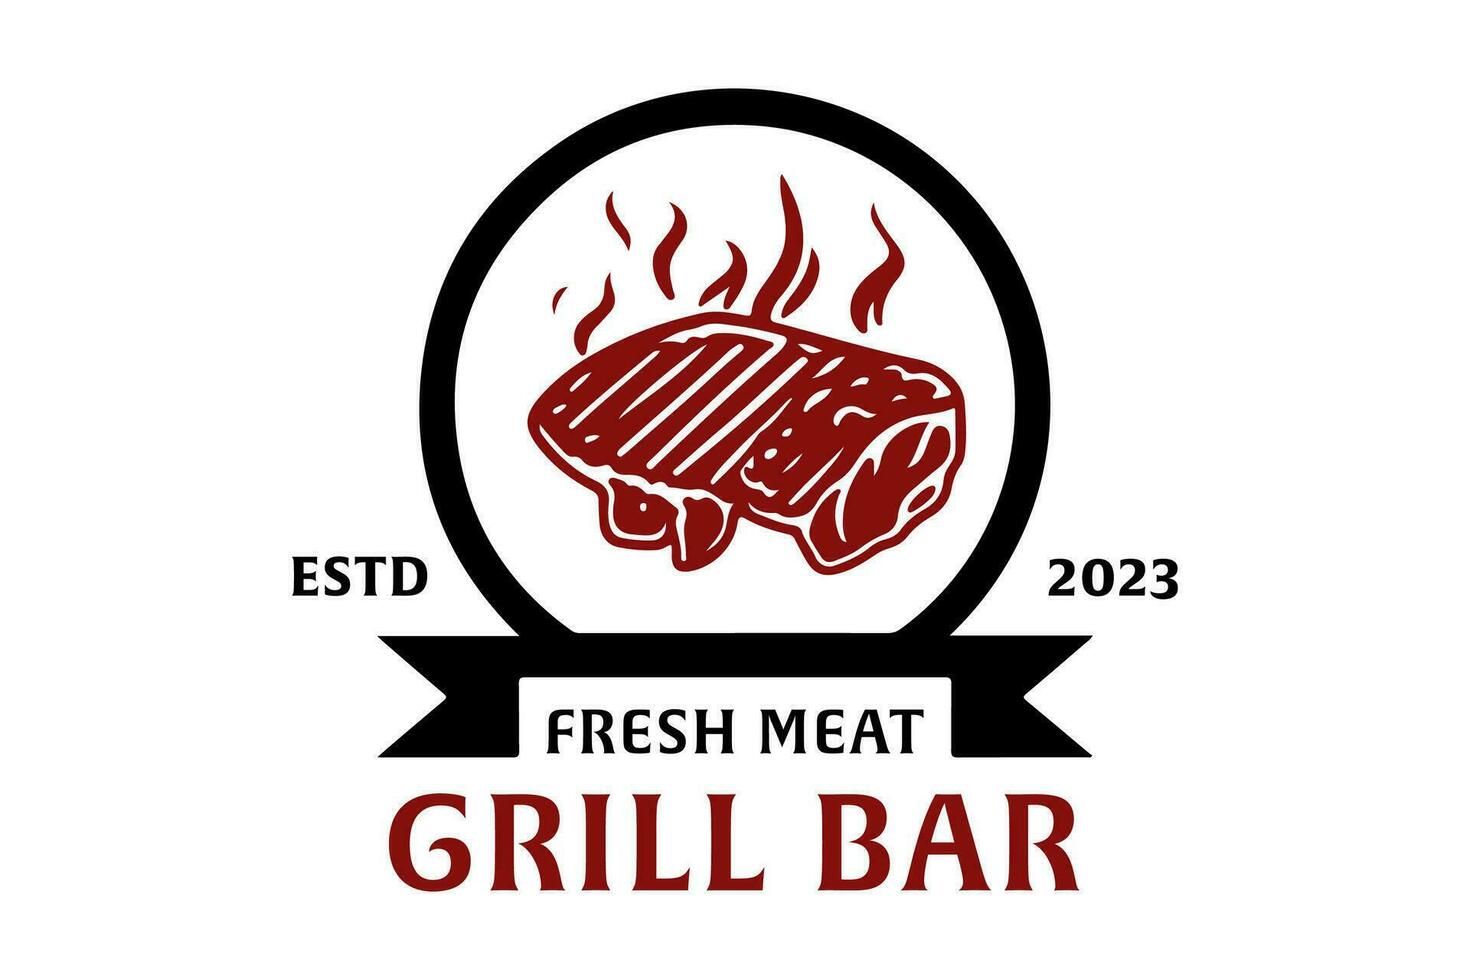 BBQ Party Logo is a design asset suitable for creating logos or branding materials for barbecue parties, cookouts, or any food-related events with a fun and casual atmosphere. vector